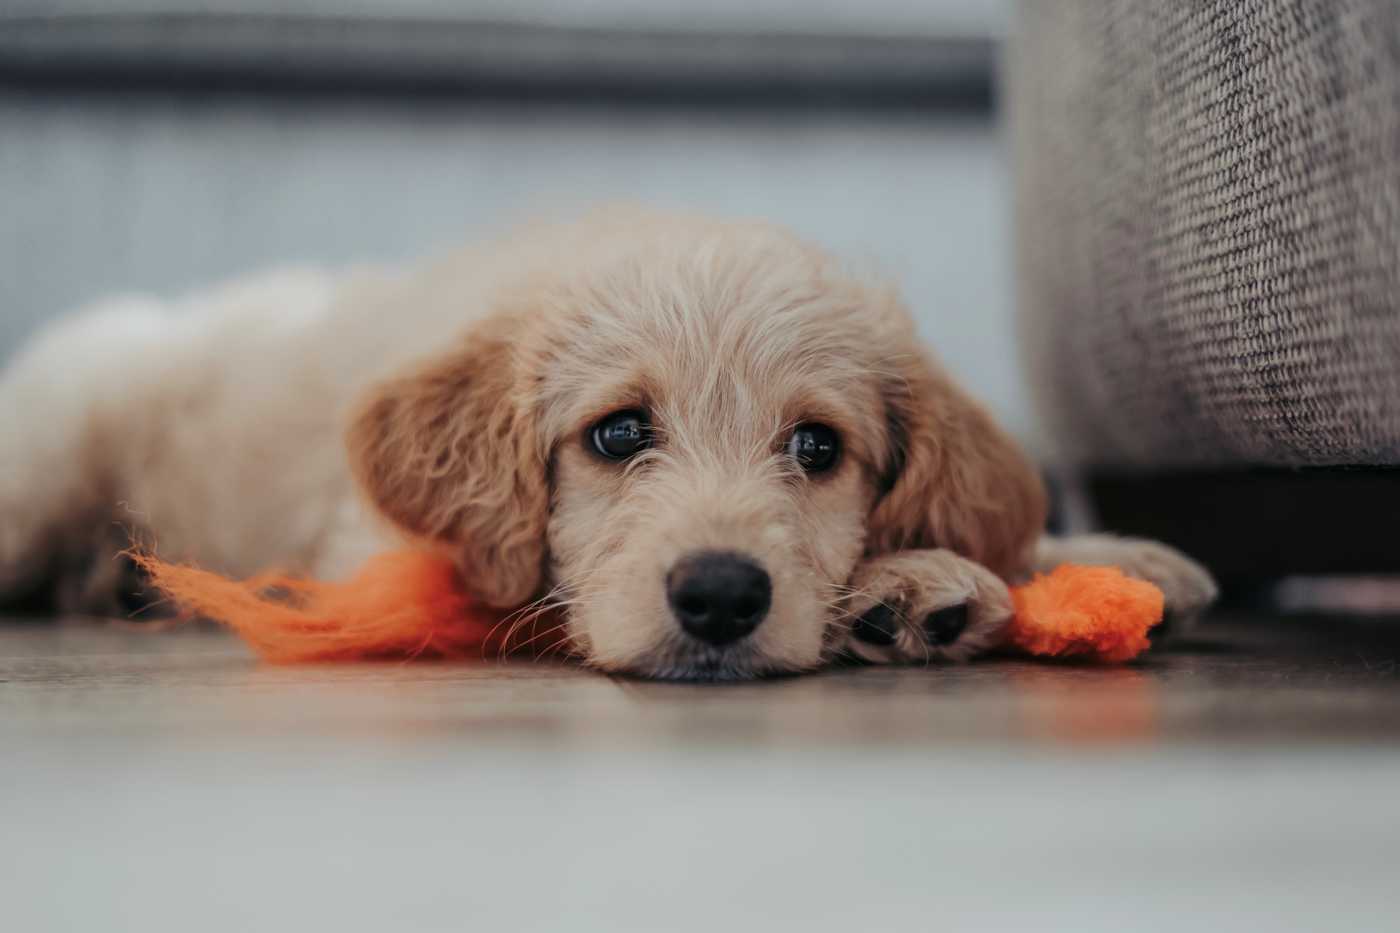 puppy anxiety and what to do if you feel puppy blues